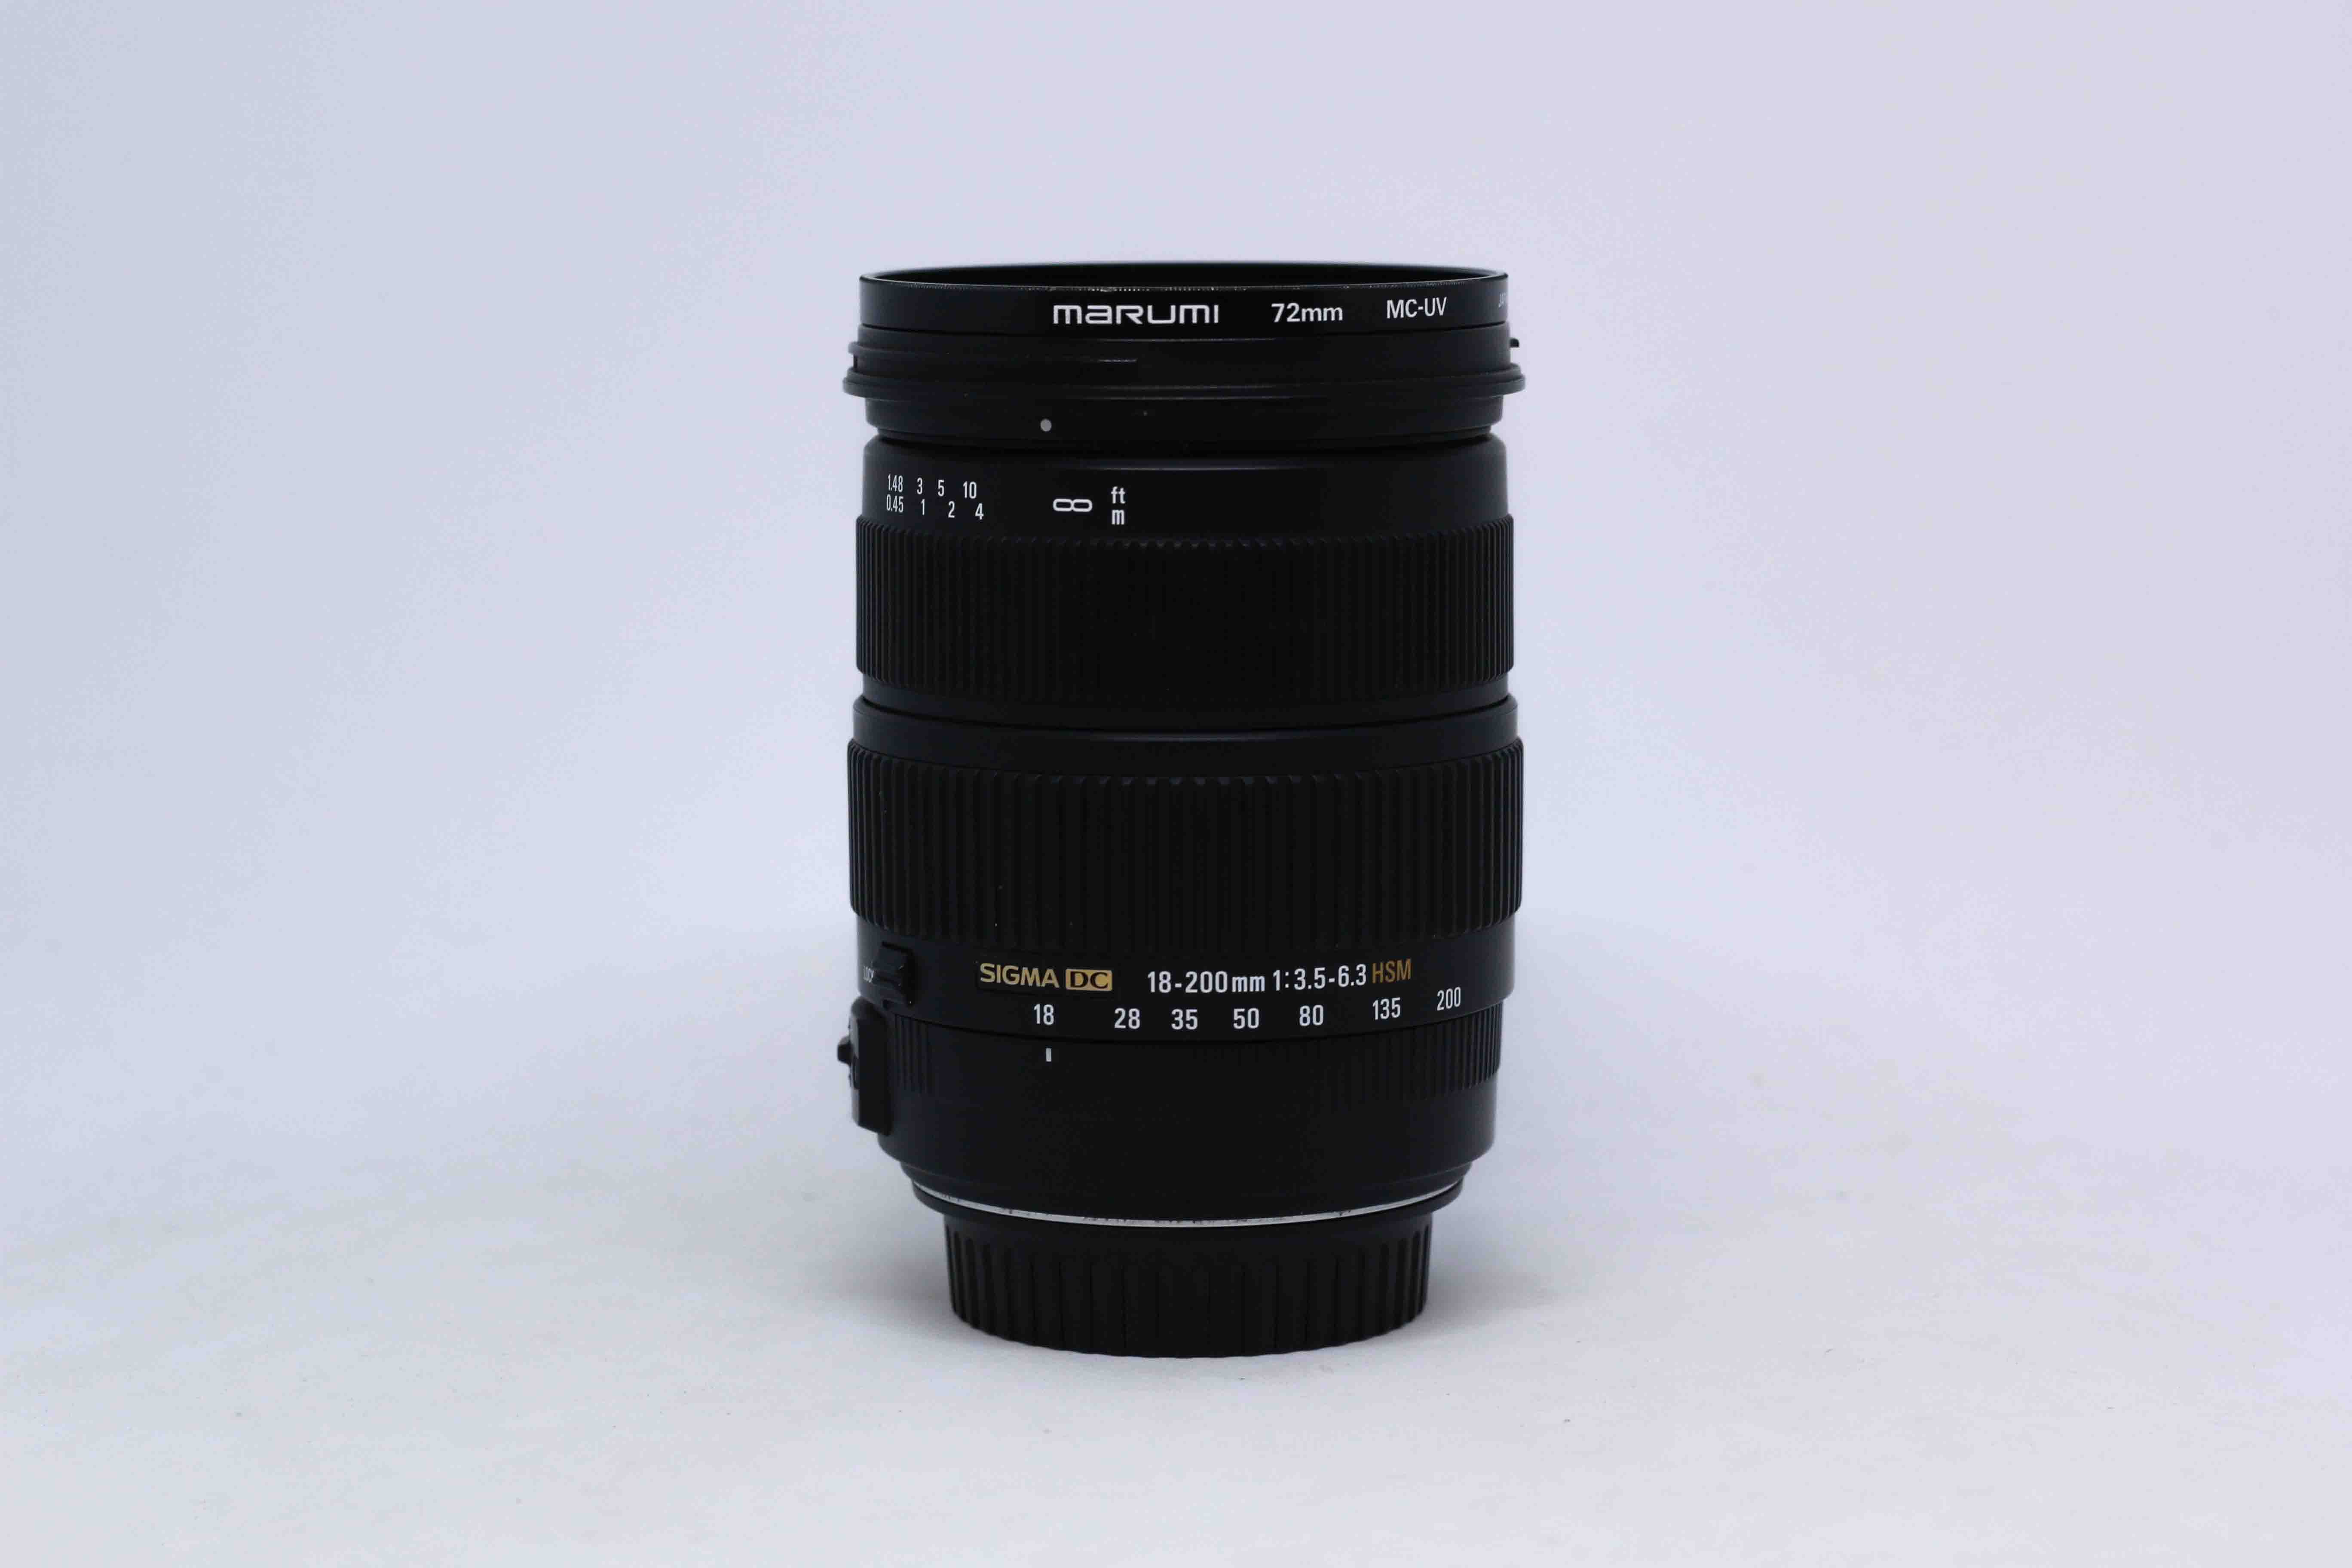 ong-kinh-sigma-18-200mm-f-3-5-6-3-ii-dc-os-hsm-for-canon